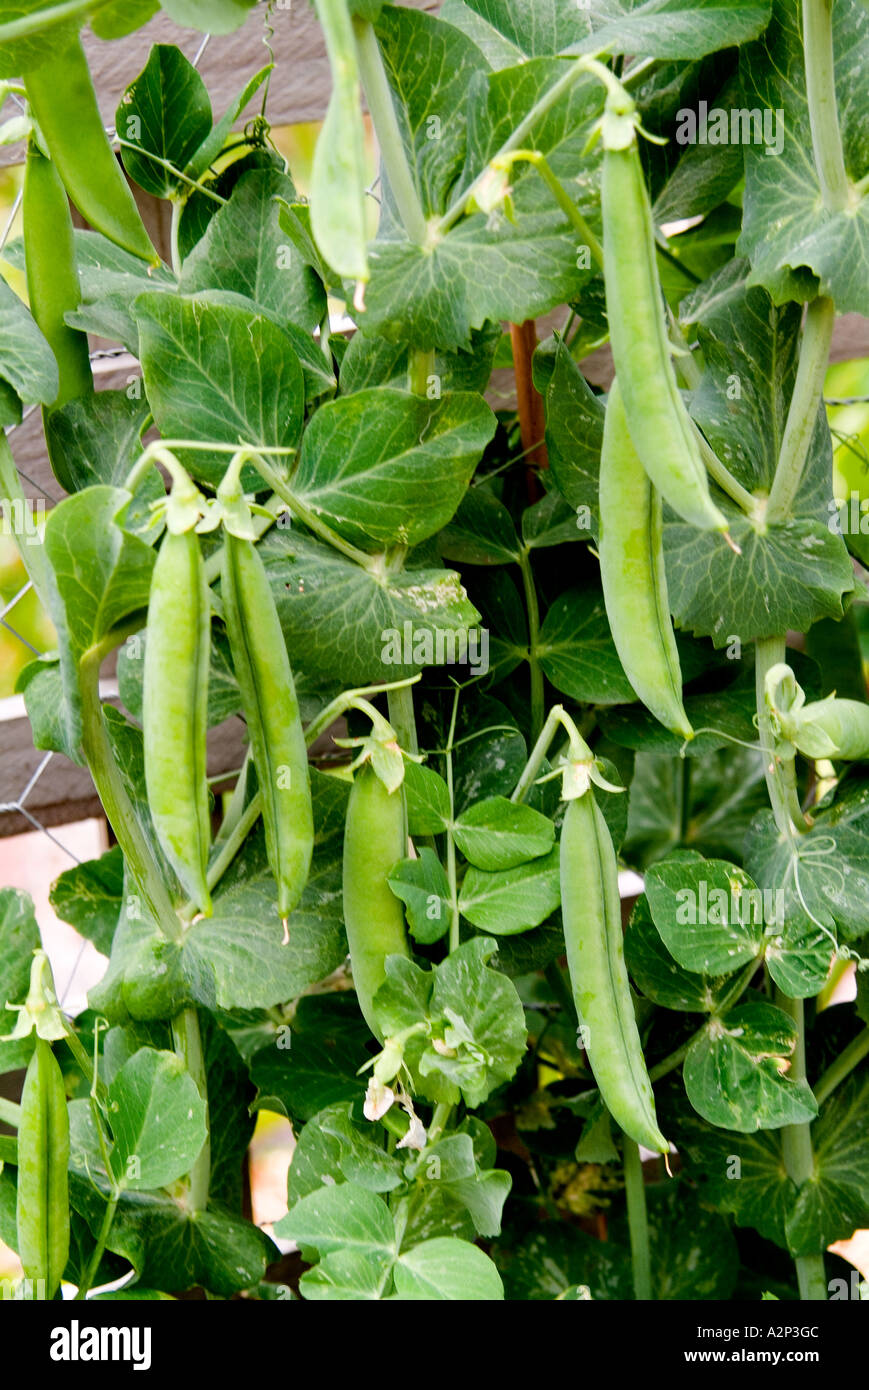 Ripening pods of Greenfeast peas on the vine. Stock Photo